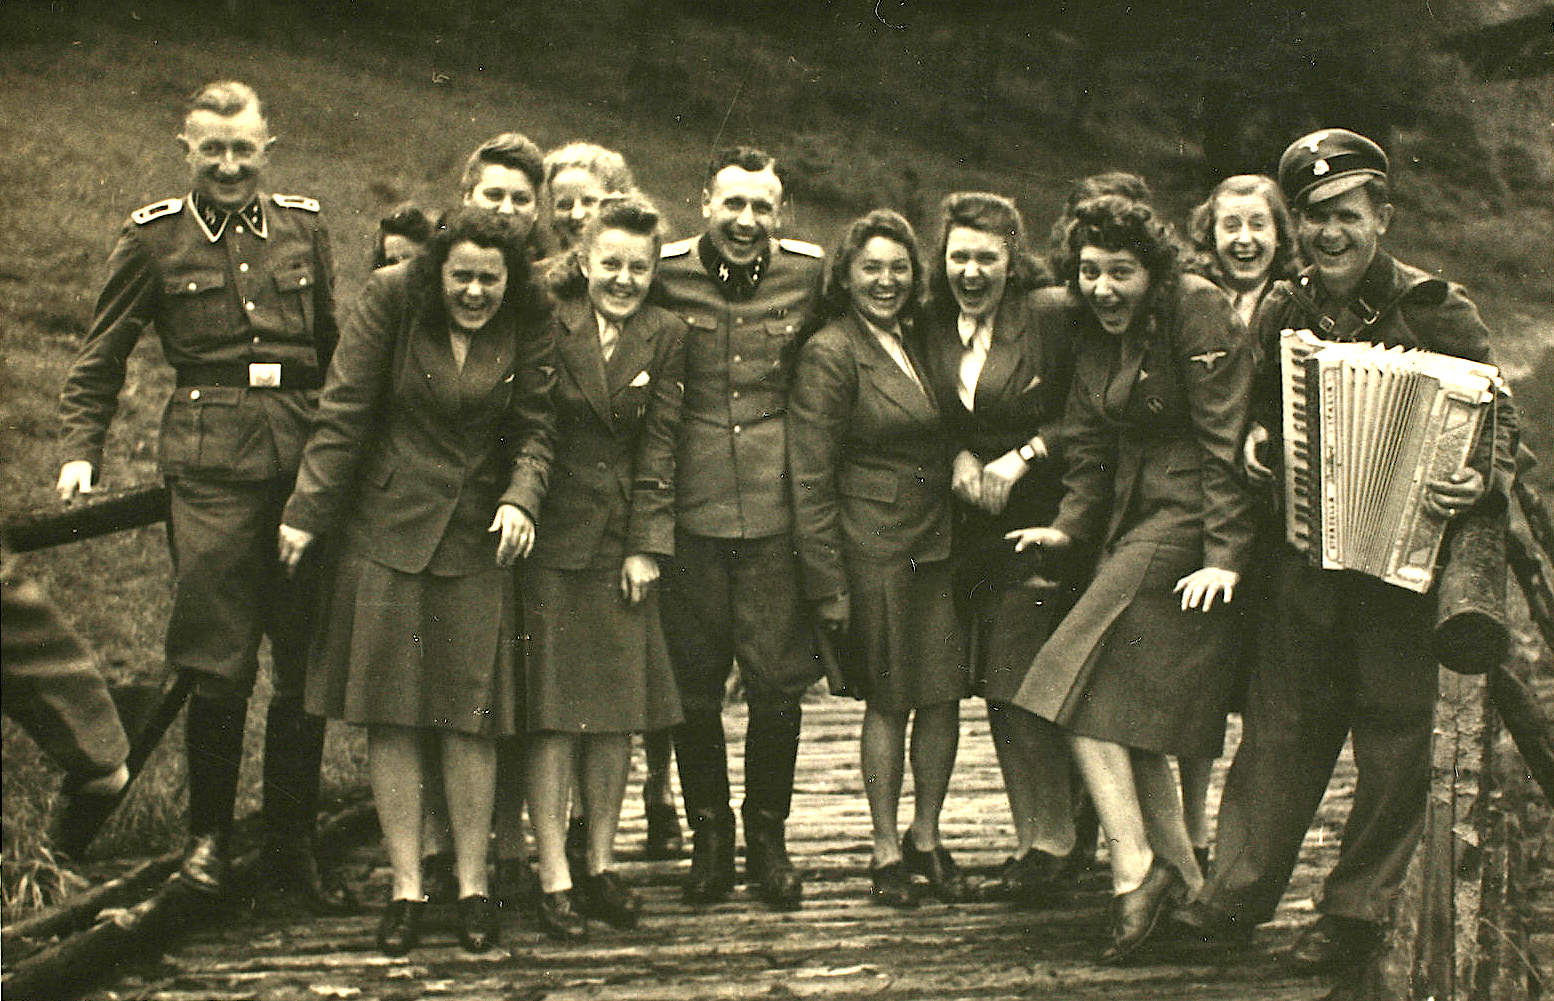 A sepia photo from 1944 of a group of about a dozen Nazi officers and auxiliaries—including Karl Höcker in the center—all openly laughing. The photo was taken at Solahütte, a "resort" where Nazis who worked at Auschwitz would vacation on weekends. They are all in uniform: The women wear long sleeved blazers and knee length skirts with flat shoes, and the men wear long sleeved military jackets and trousers tucked into tall boots. The man on the right is wearing a Nazi hat and is holding an accordion. They're standing on what appears to be a wooden bridge. There is grass behind them.